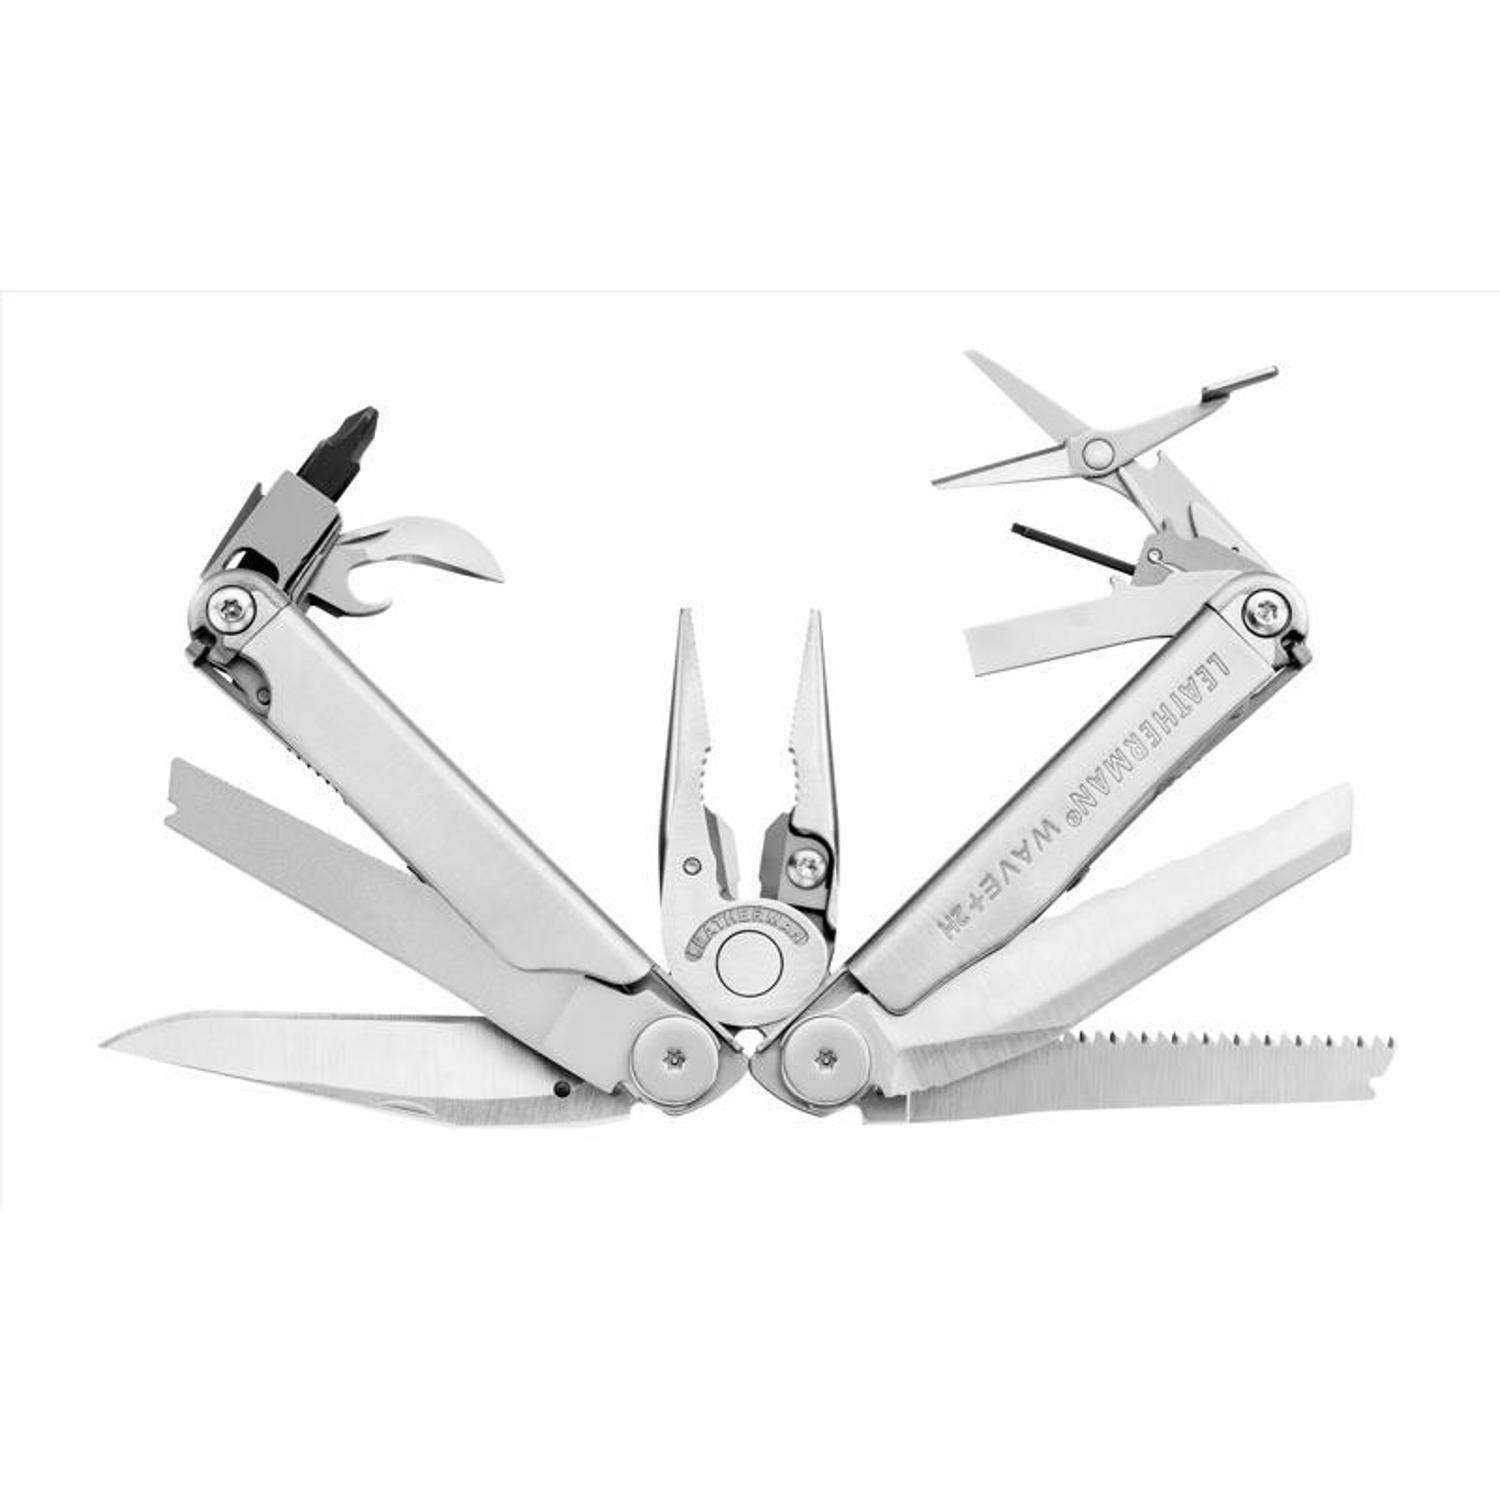 Leatherman Wave+, Fast Delivery